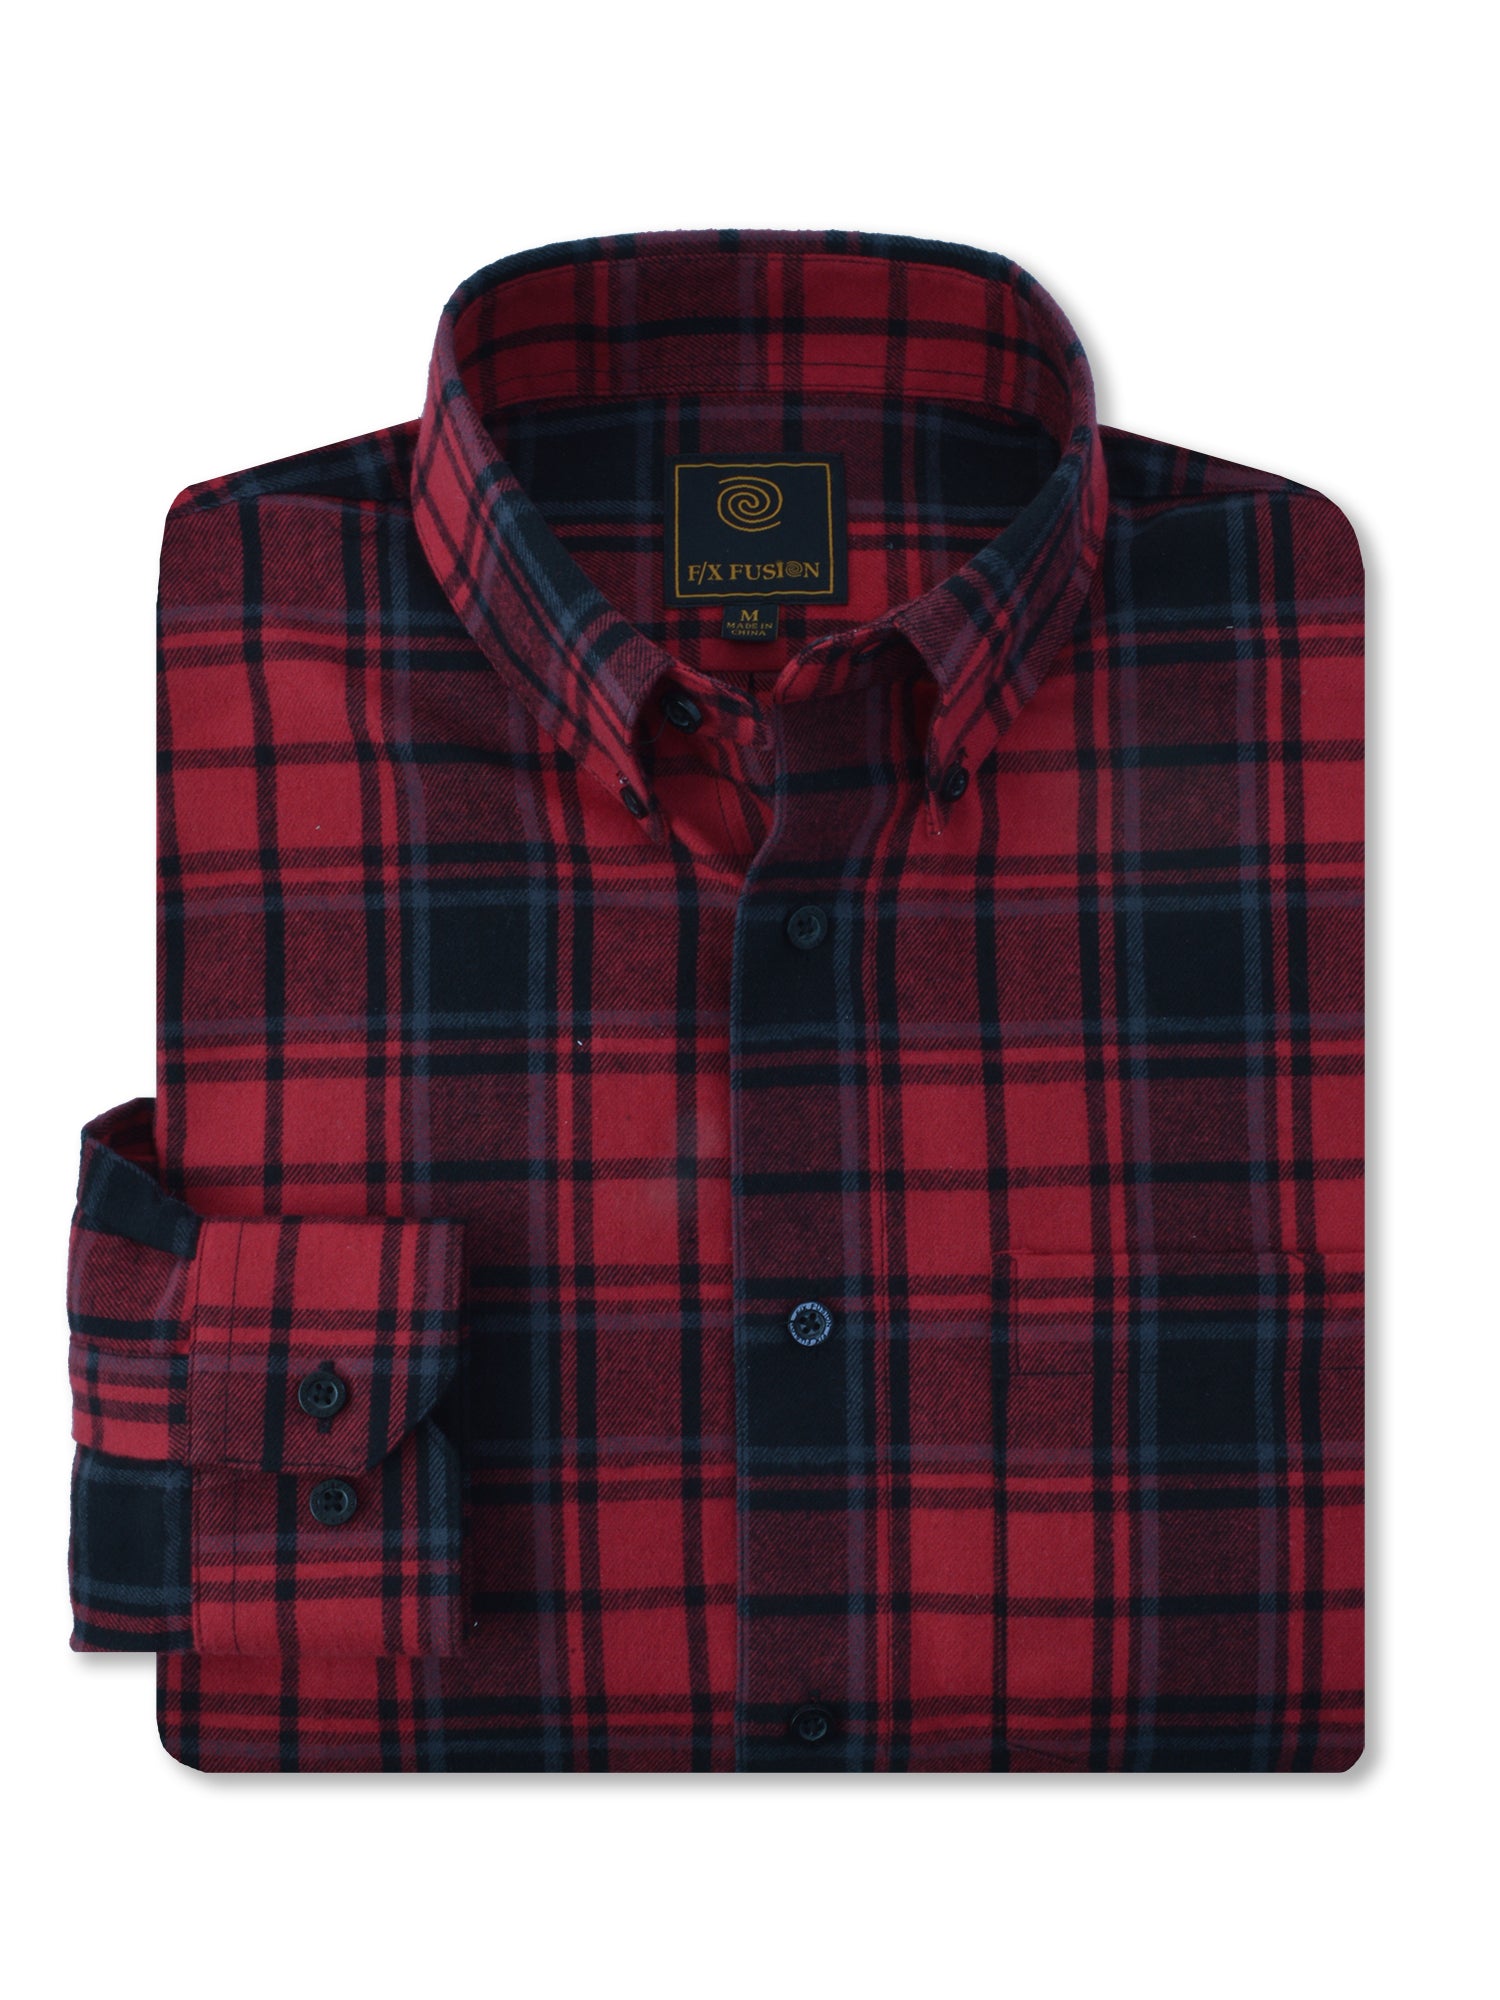 F/X Fusion Flannel Plaid Shirt in Red/Black - Tall Man Sizes